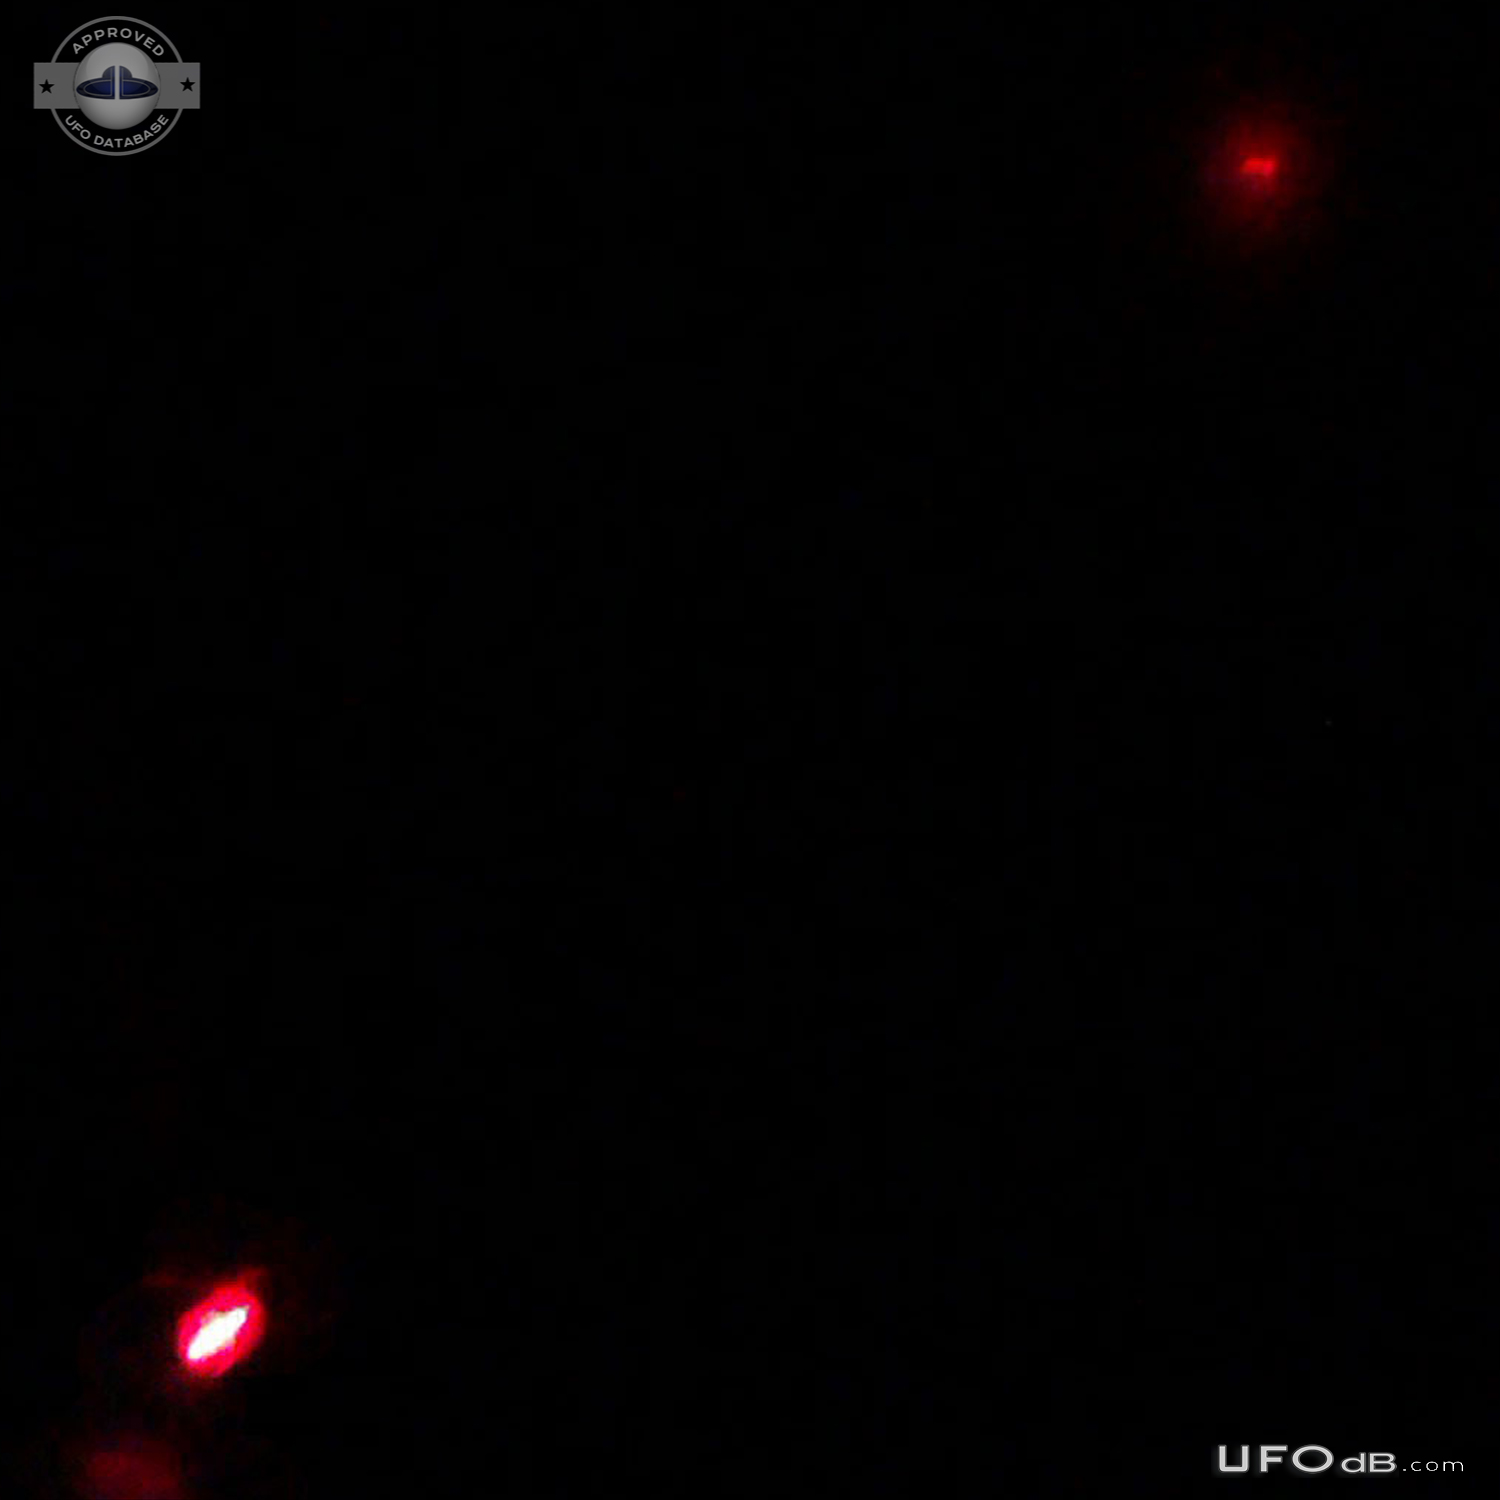 2 Red UFOs illuminating the Clouds - Toddington, Bedfordshire UK 2013 UFO Picture #653-4